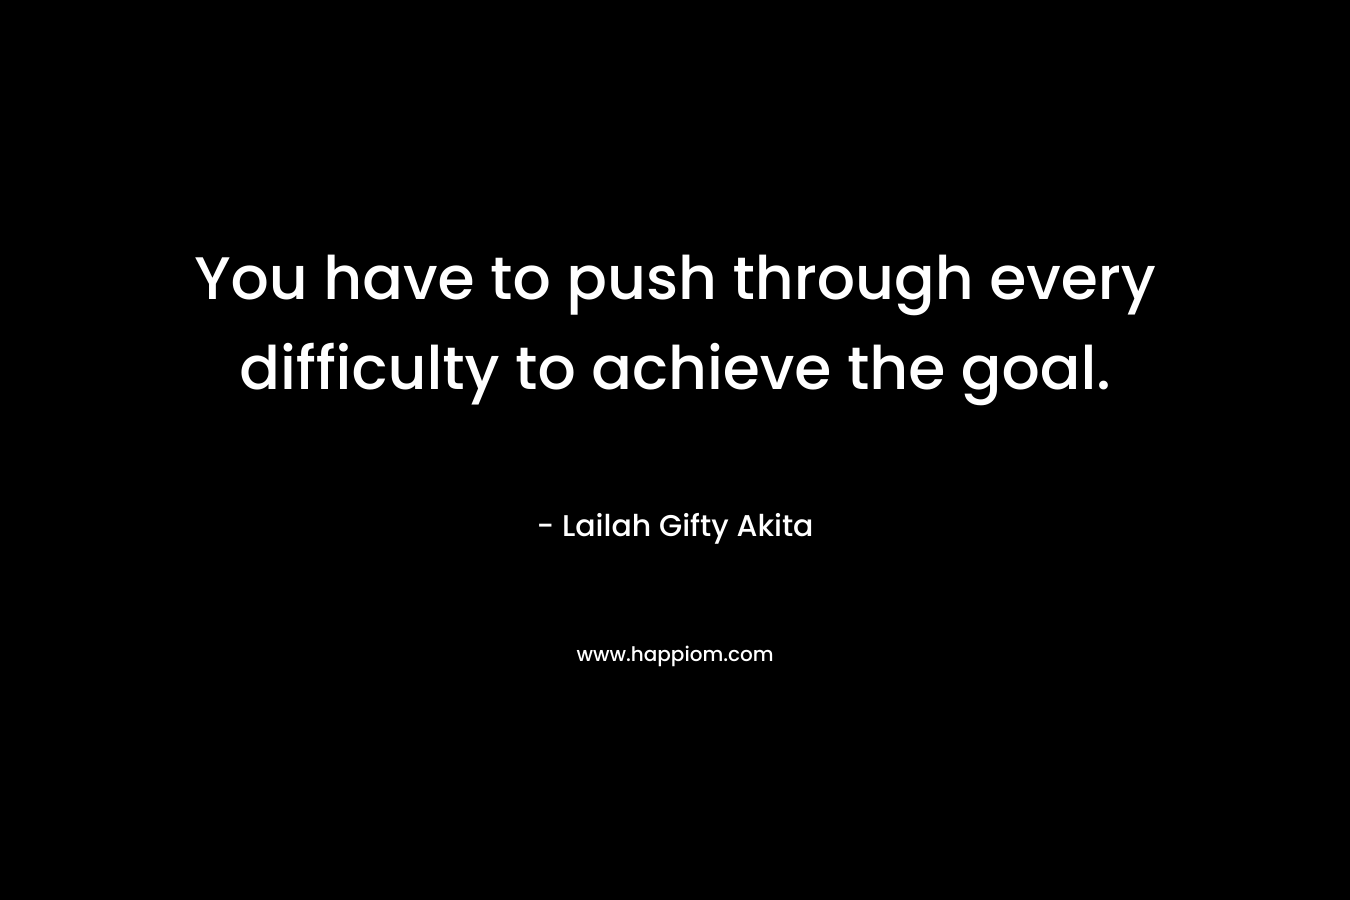 You have to push through every difficulty to achieve the goal.